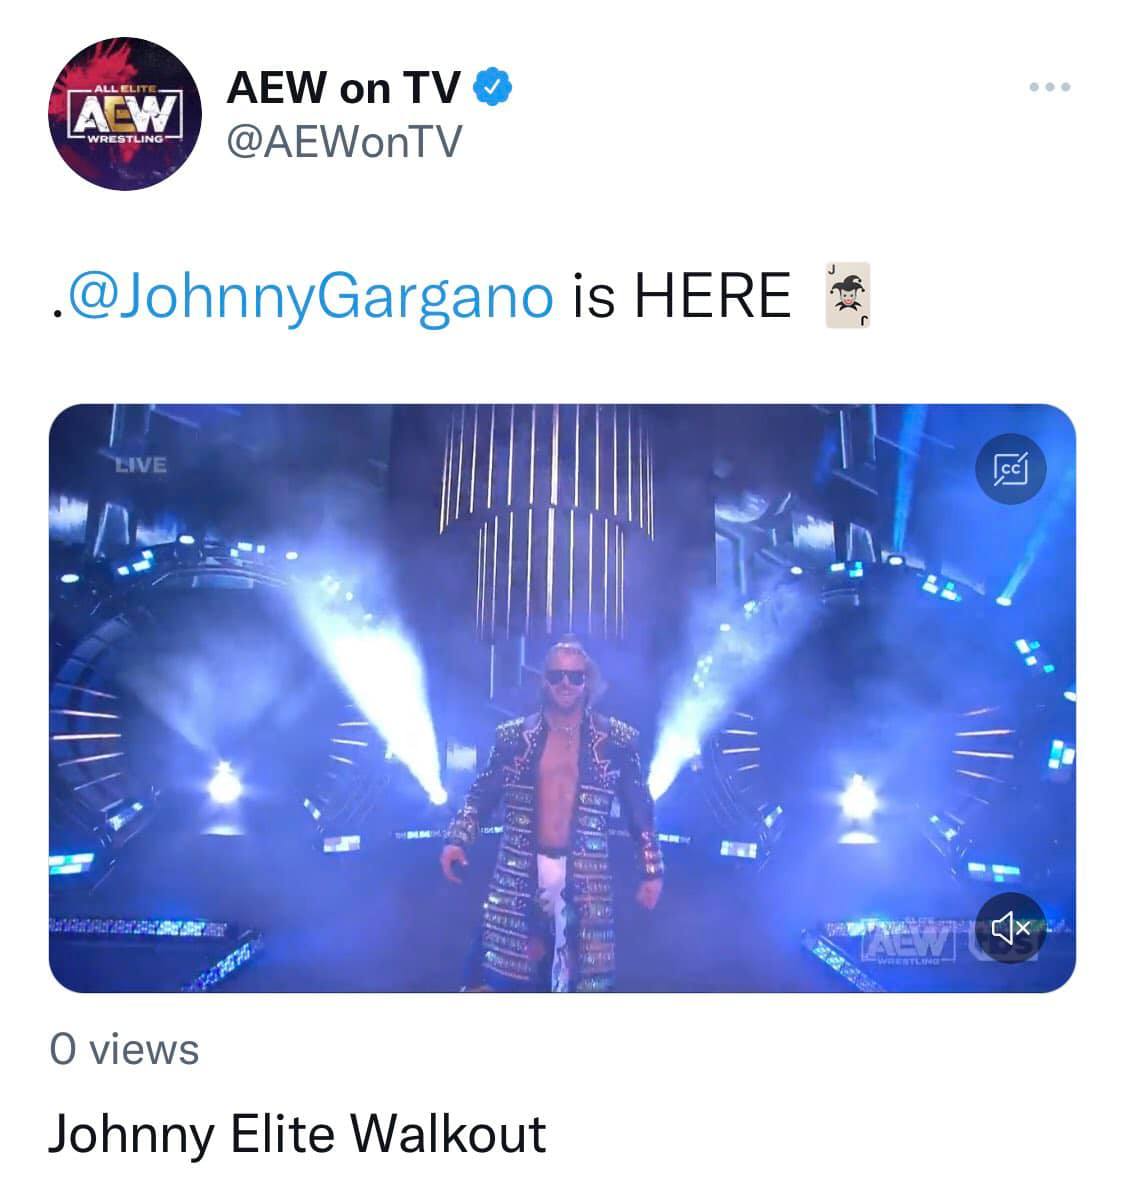 AEW On TV Twitter Account Botched John Morrison's Name When He Debuted On Dynamite